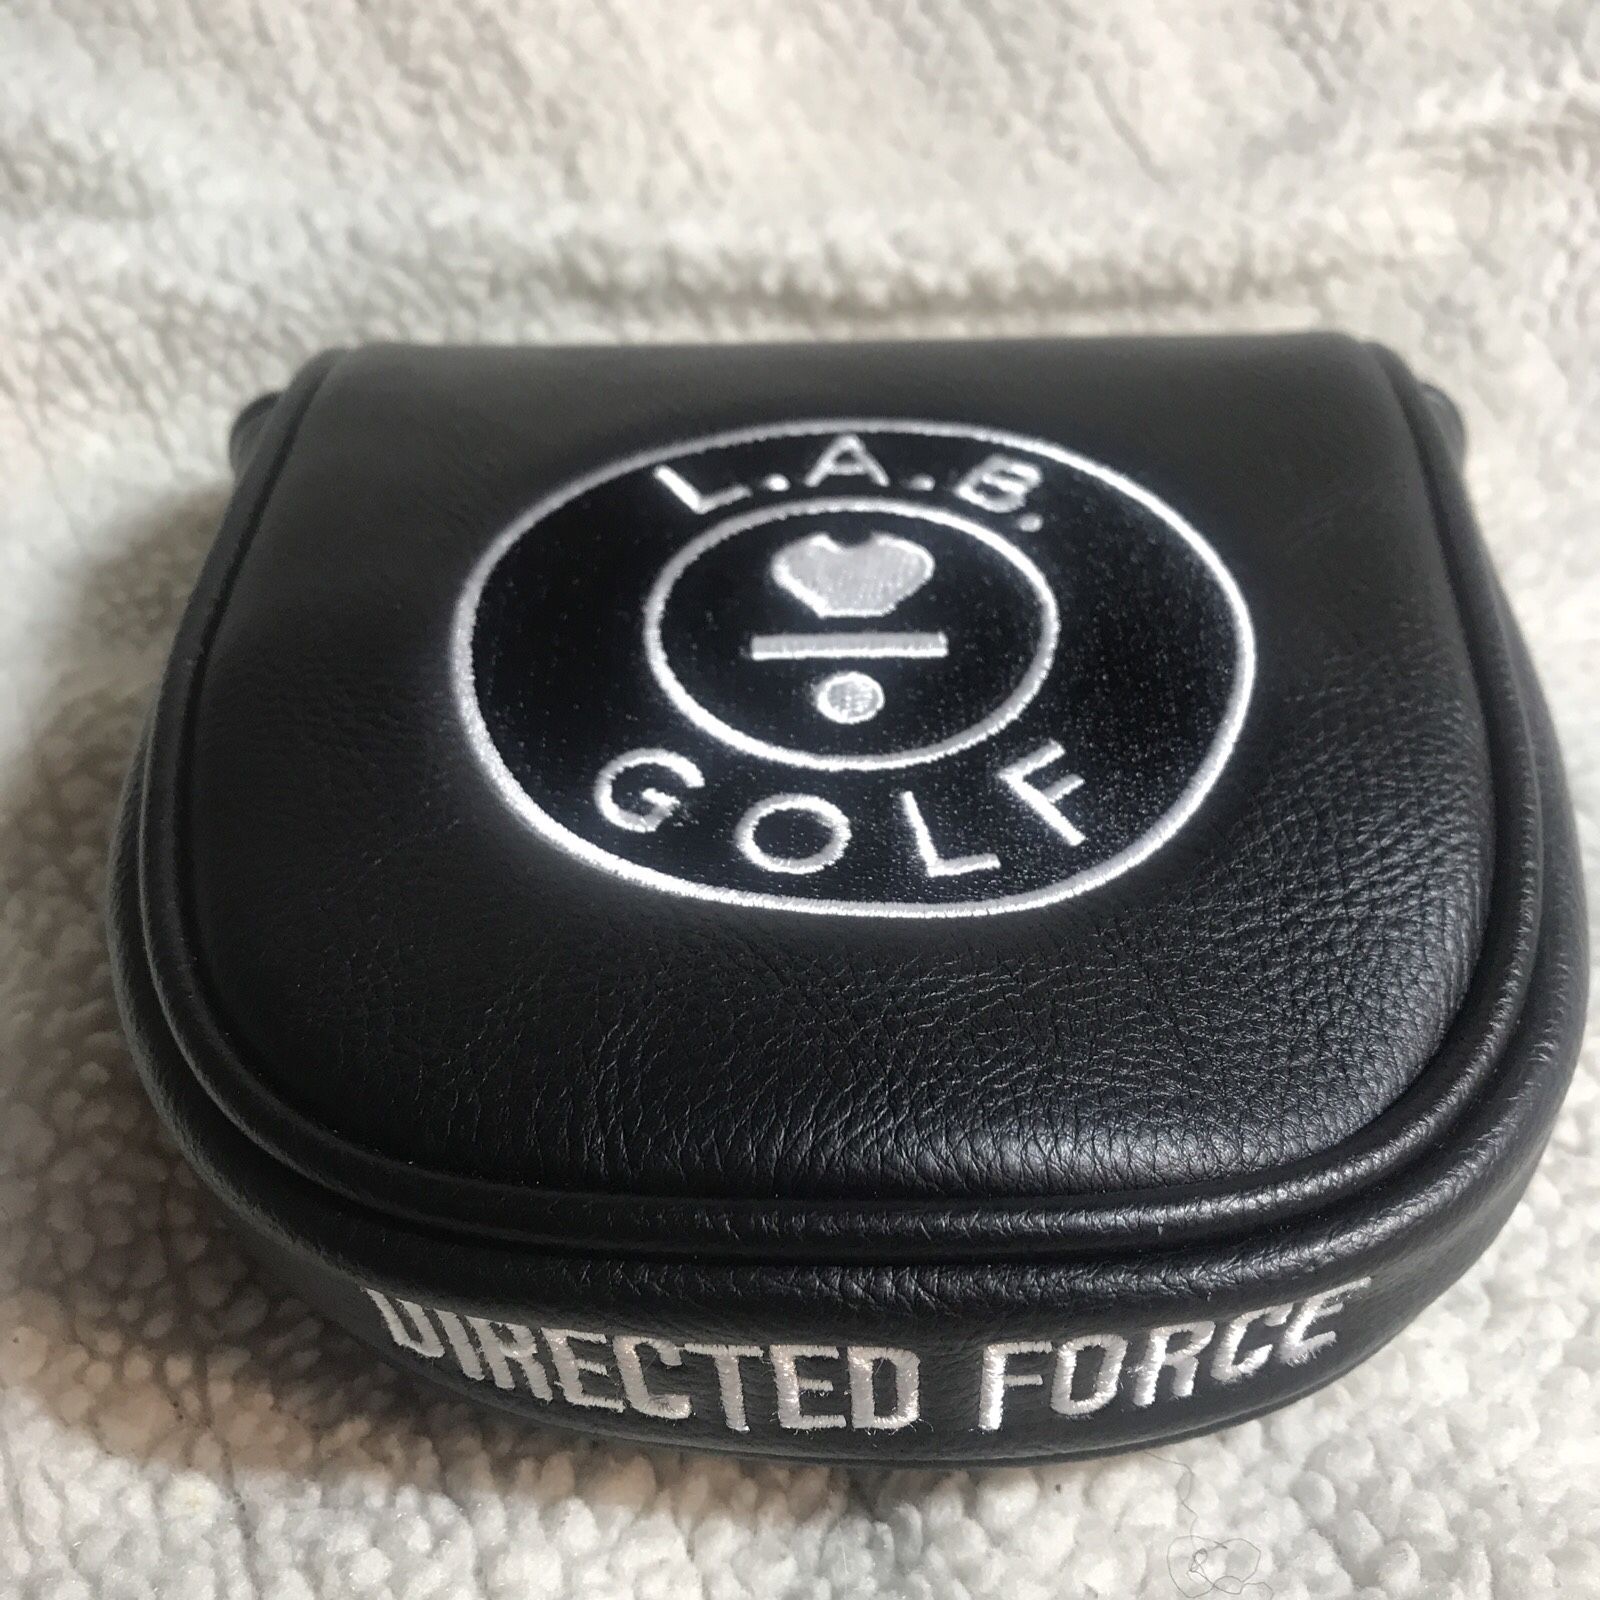 L.A.B. Golf Directed Force Mallet, Putter Head Cover, BLK. w/ Magnetic Closure